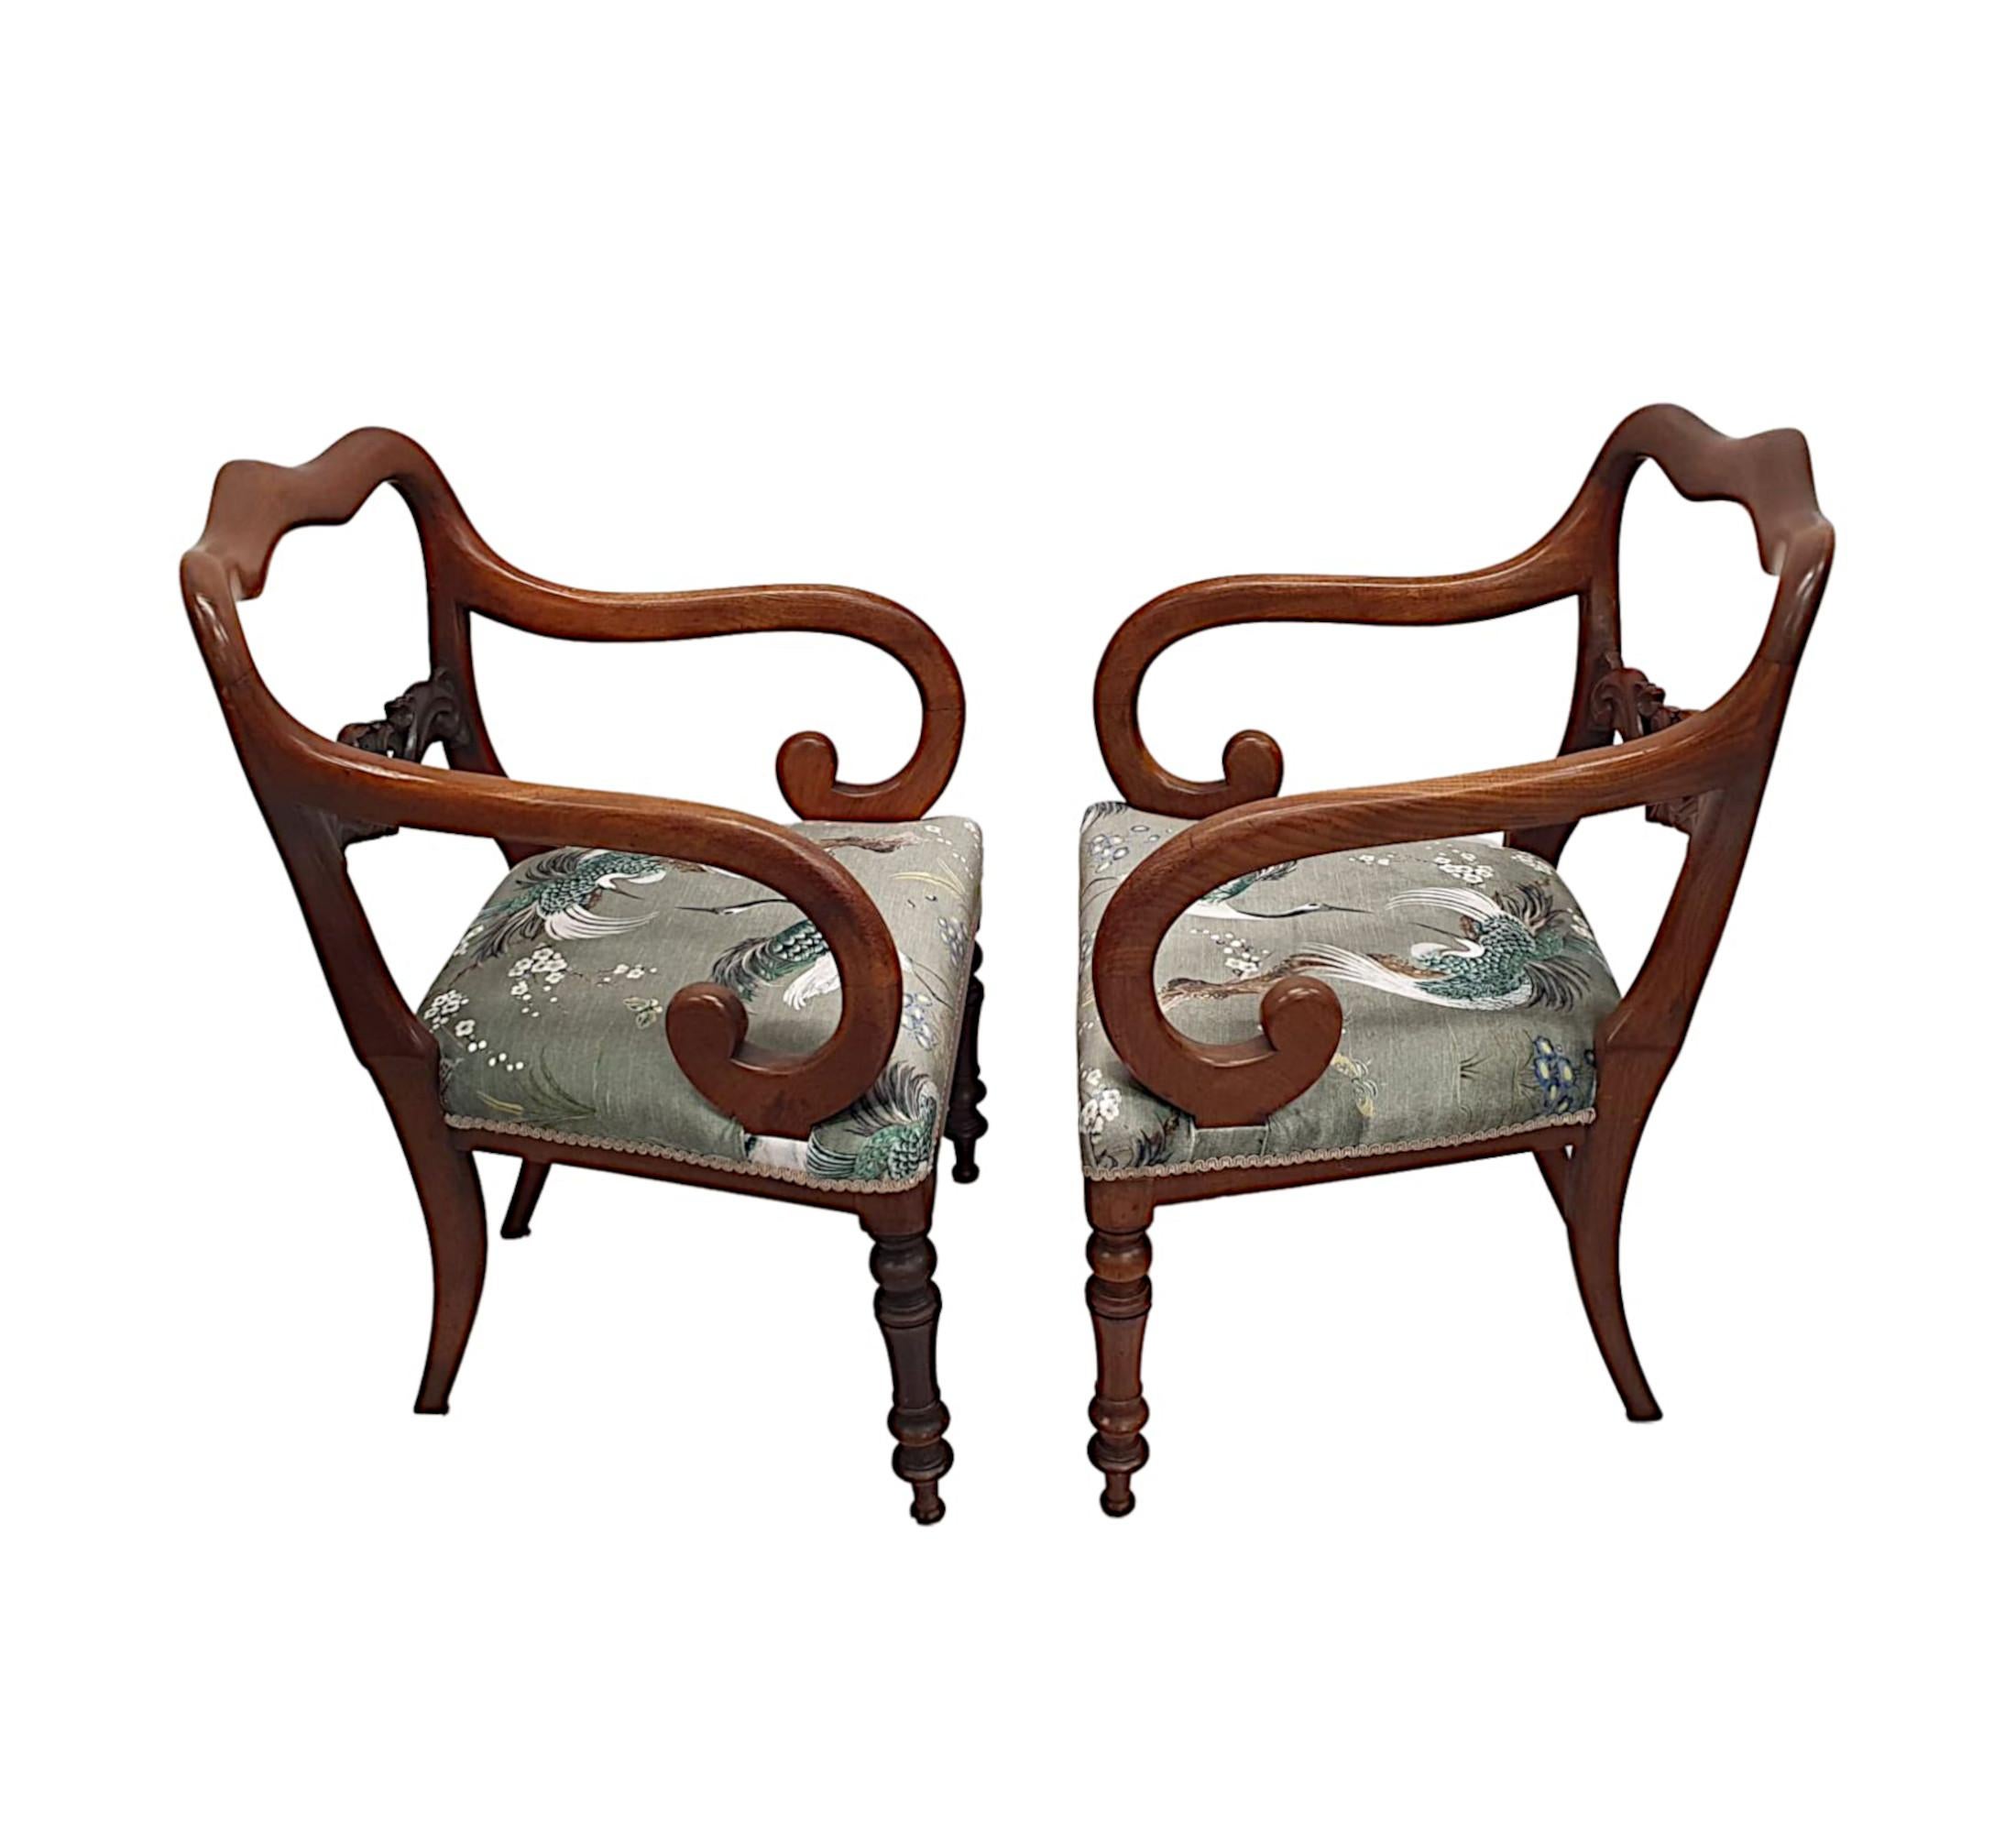 A fine pair of 19th Century mahogany carver armchairs of fabulous quality, stunningly hand carved with rich patination and grain.  The serpentine crest rail is raised above pierced and shaped back splat with centred acanthus leaf and s-scroll motif